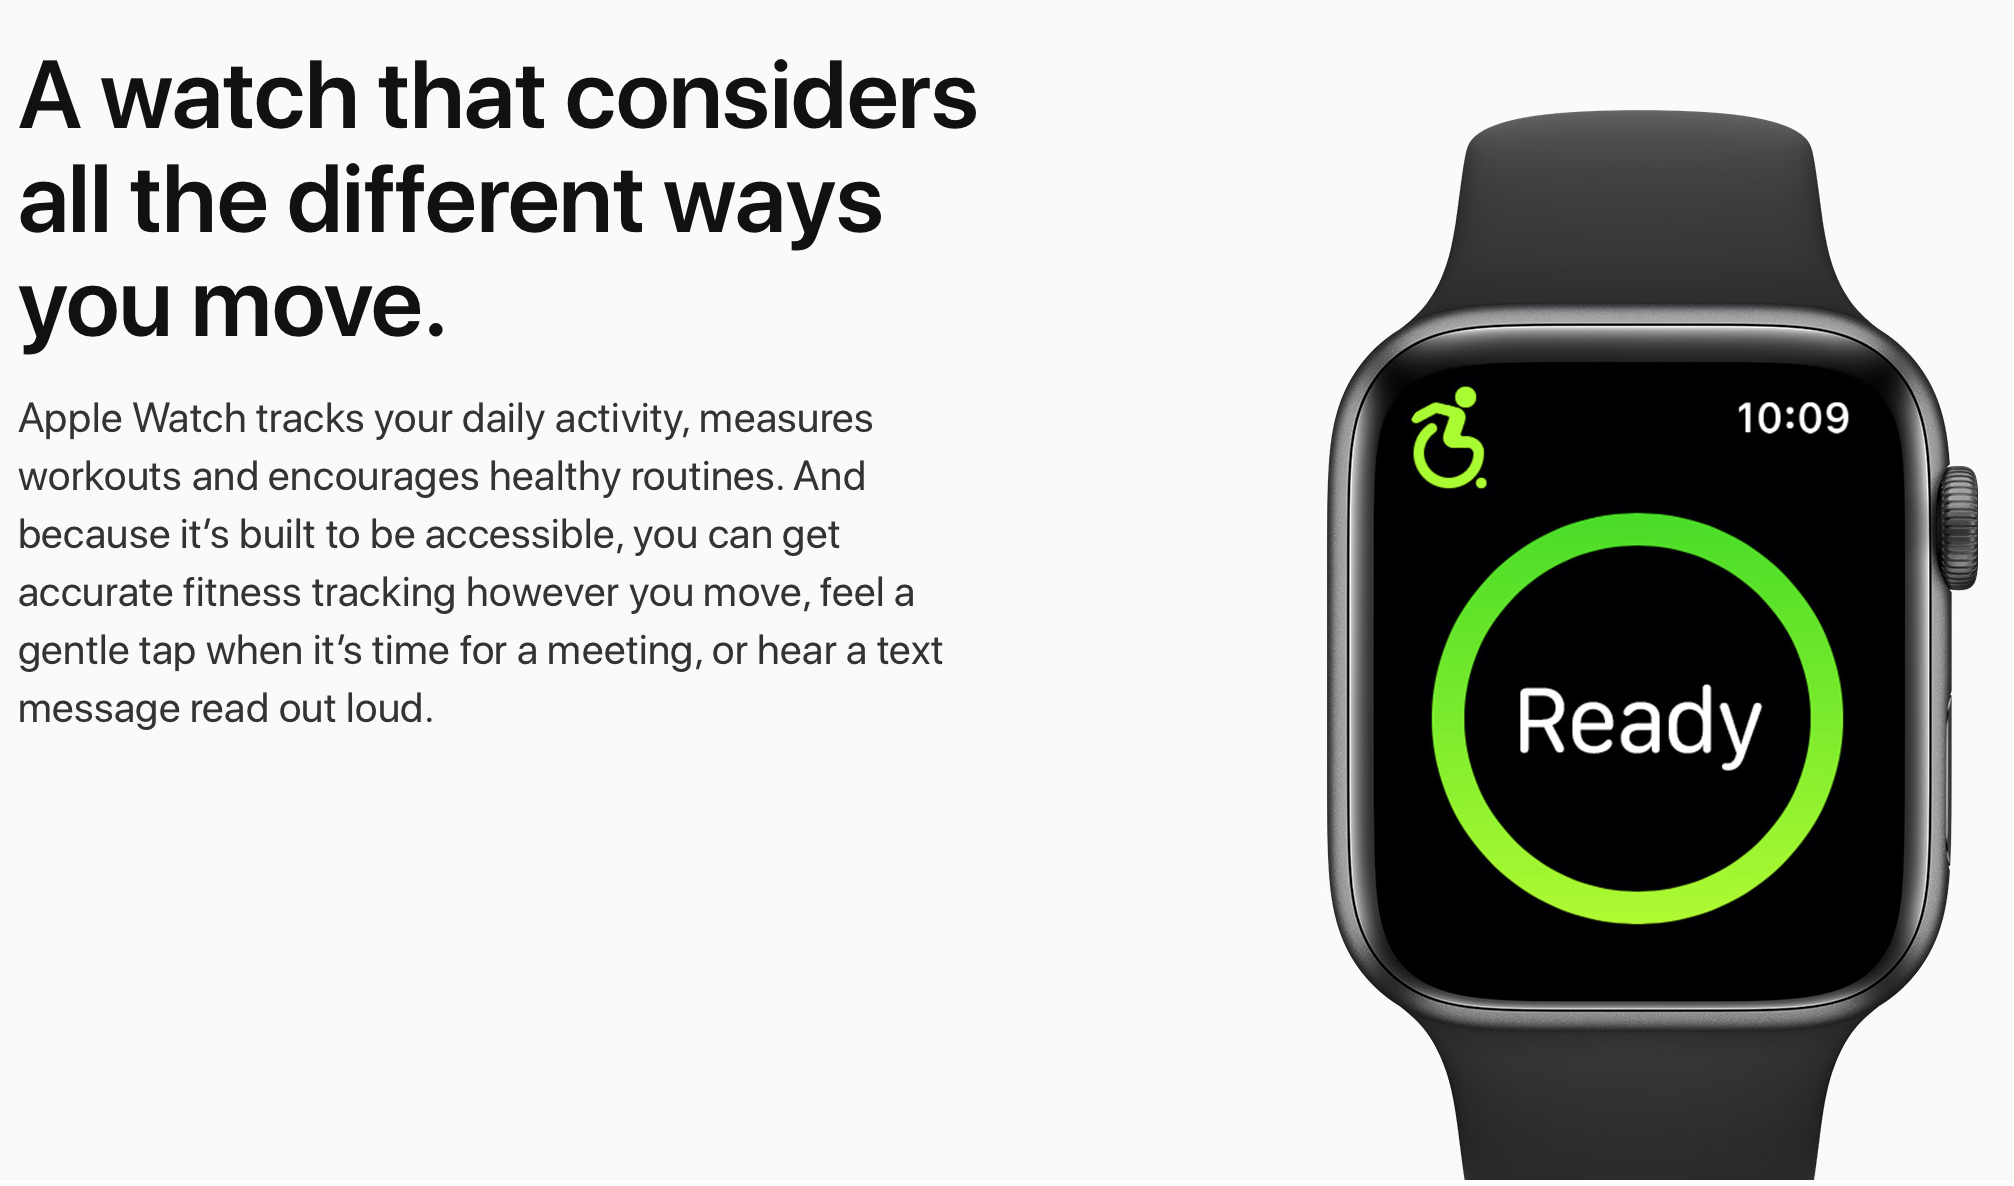 an Apple advert for the smart watch states 'a watch that considers the different ways you move' with a picture of the app on the watch